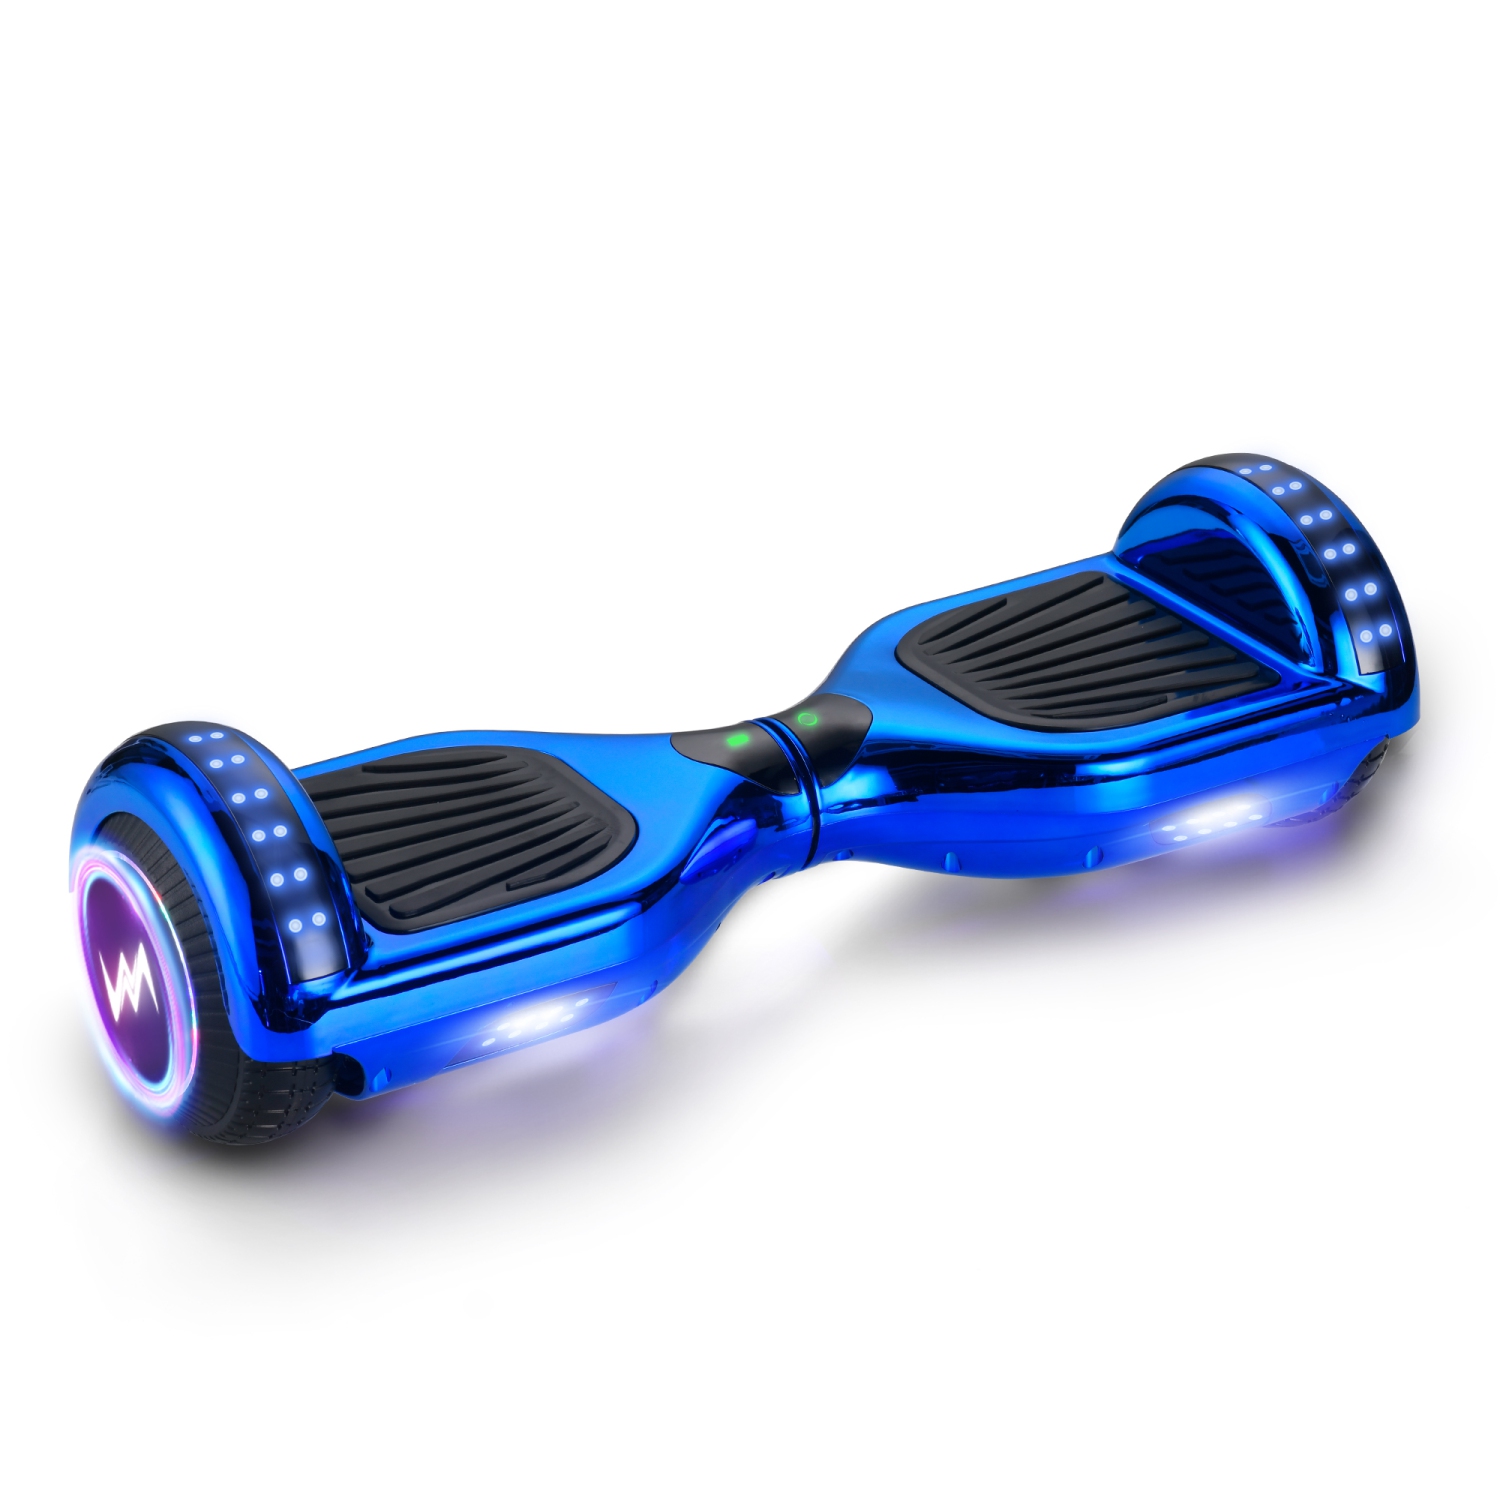 WEELMOTION Chrome Blue Hoverboard with Music Speaker and LED Front & Strap Lights Shining Wheels All Terrain 6.5" UL 2272 Certified Hoverboard with free hover board bag